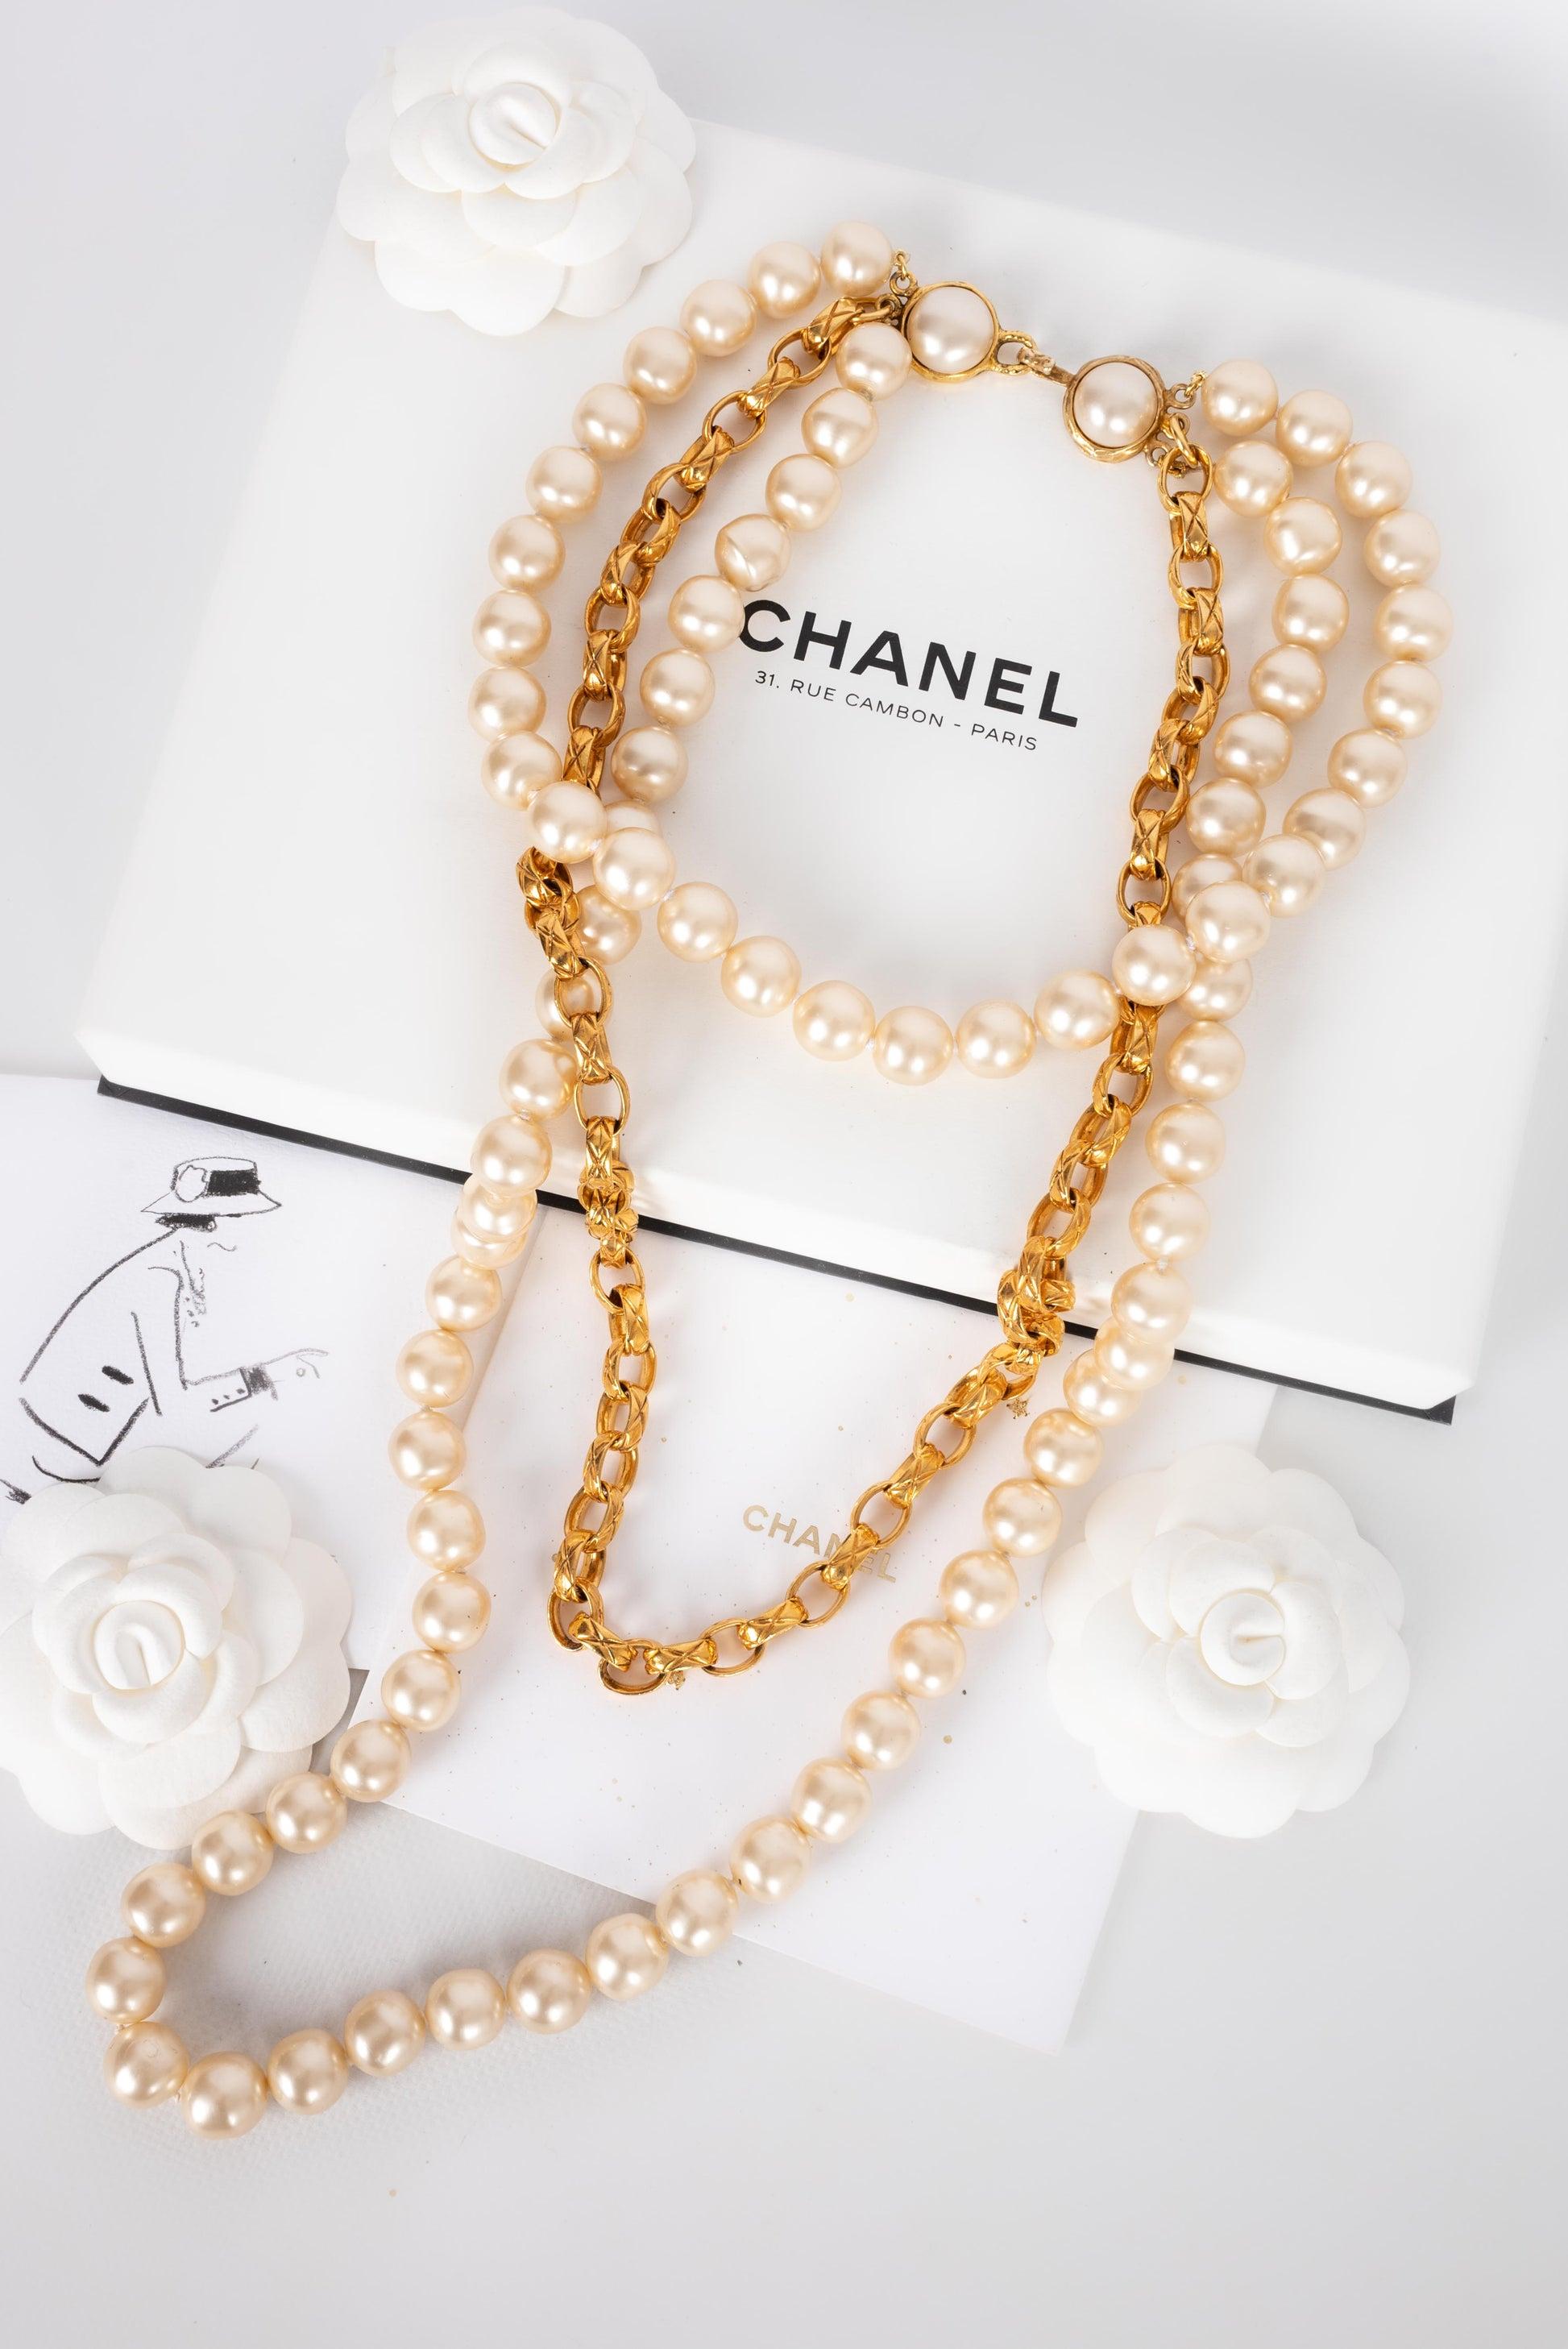 Chanel Necklace in Gold-Plated Metal and Costume Pearly Beads, 1990s For Sale 4